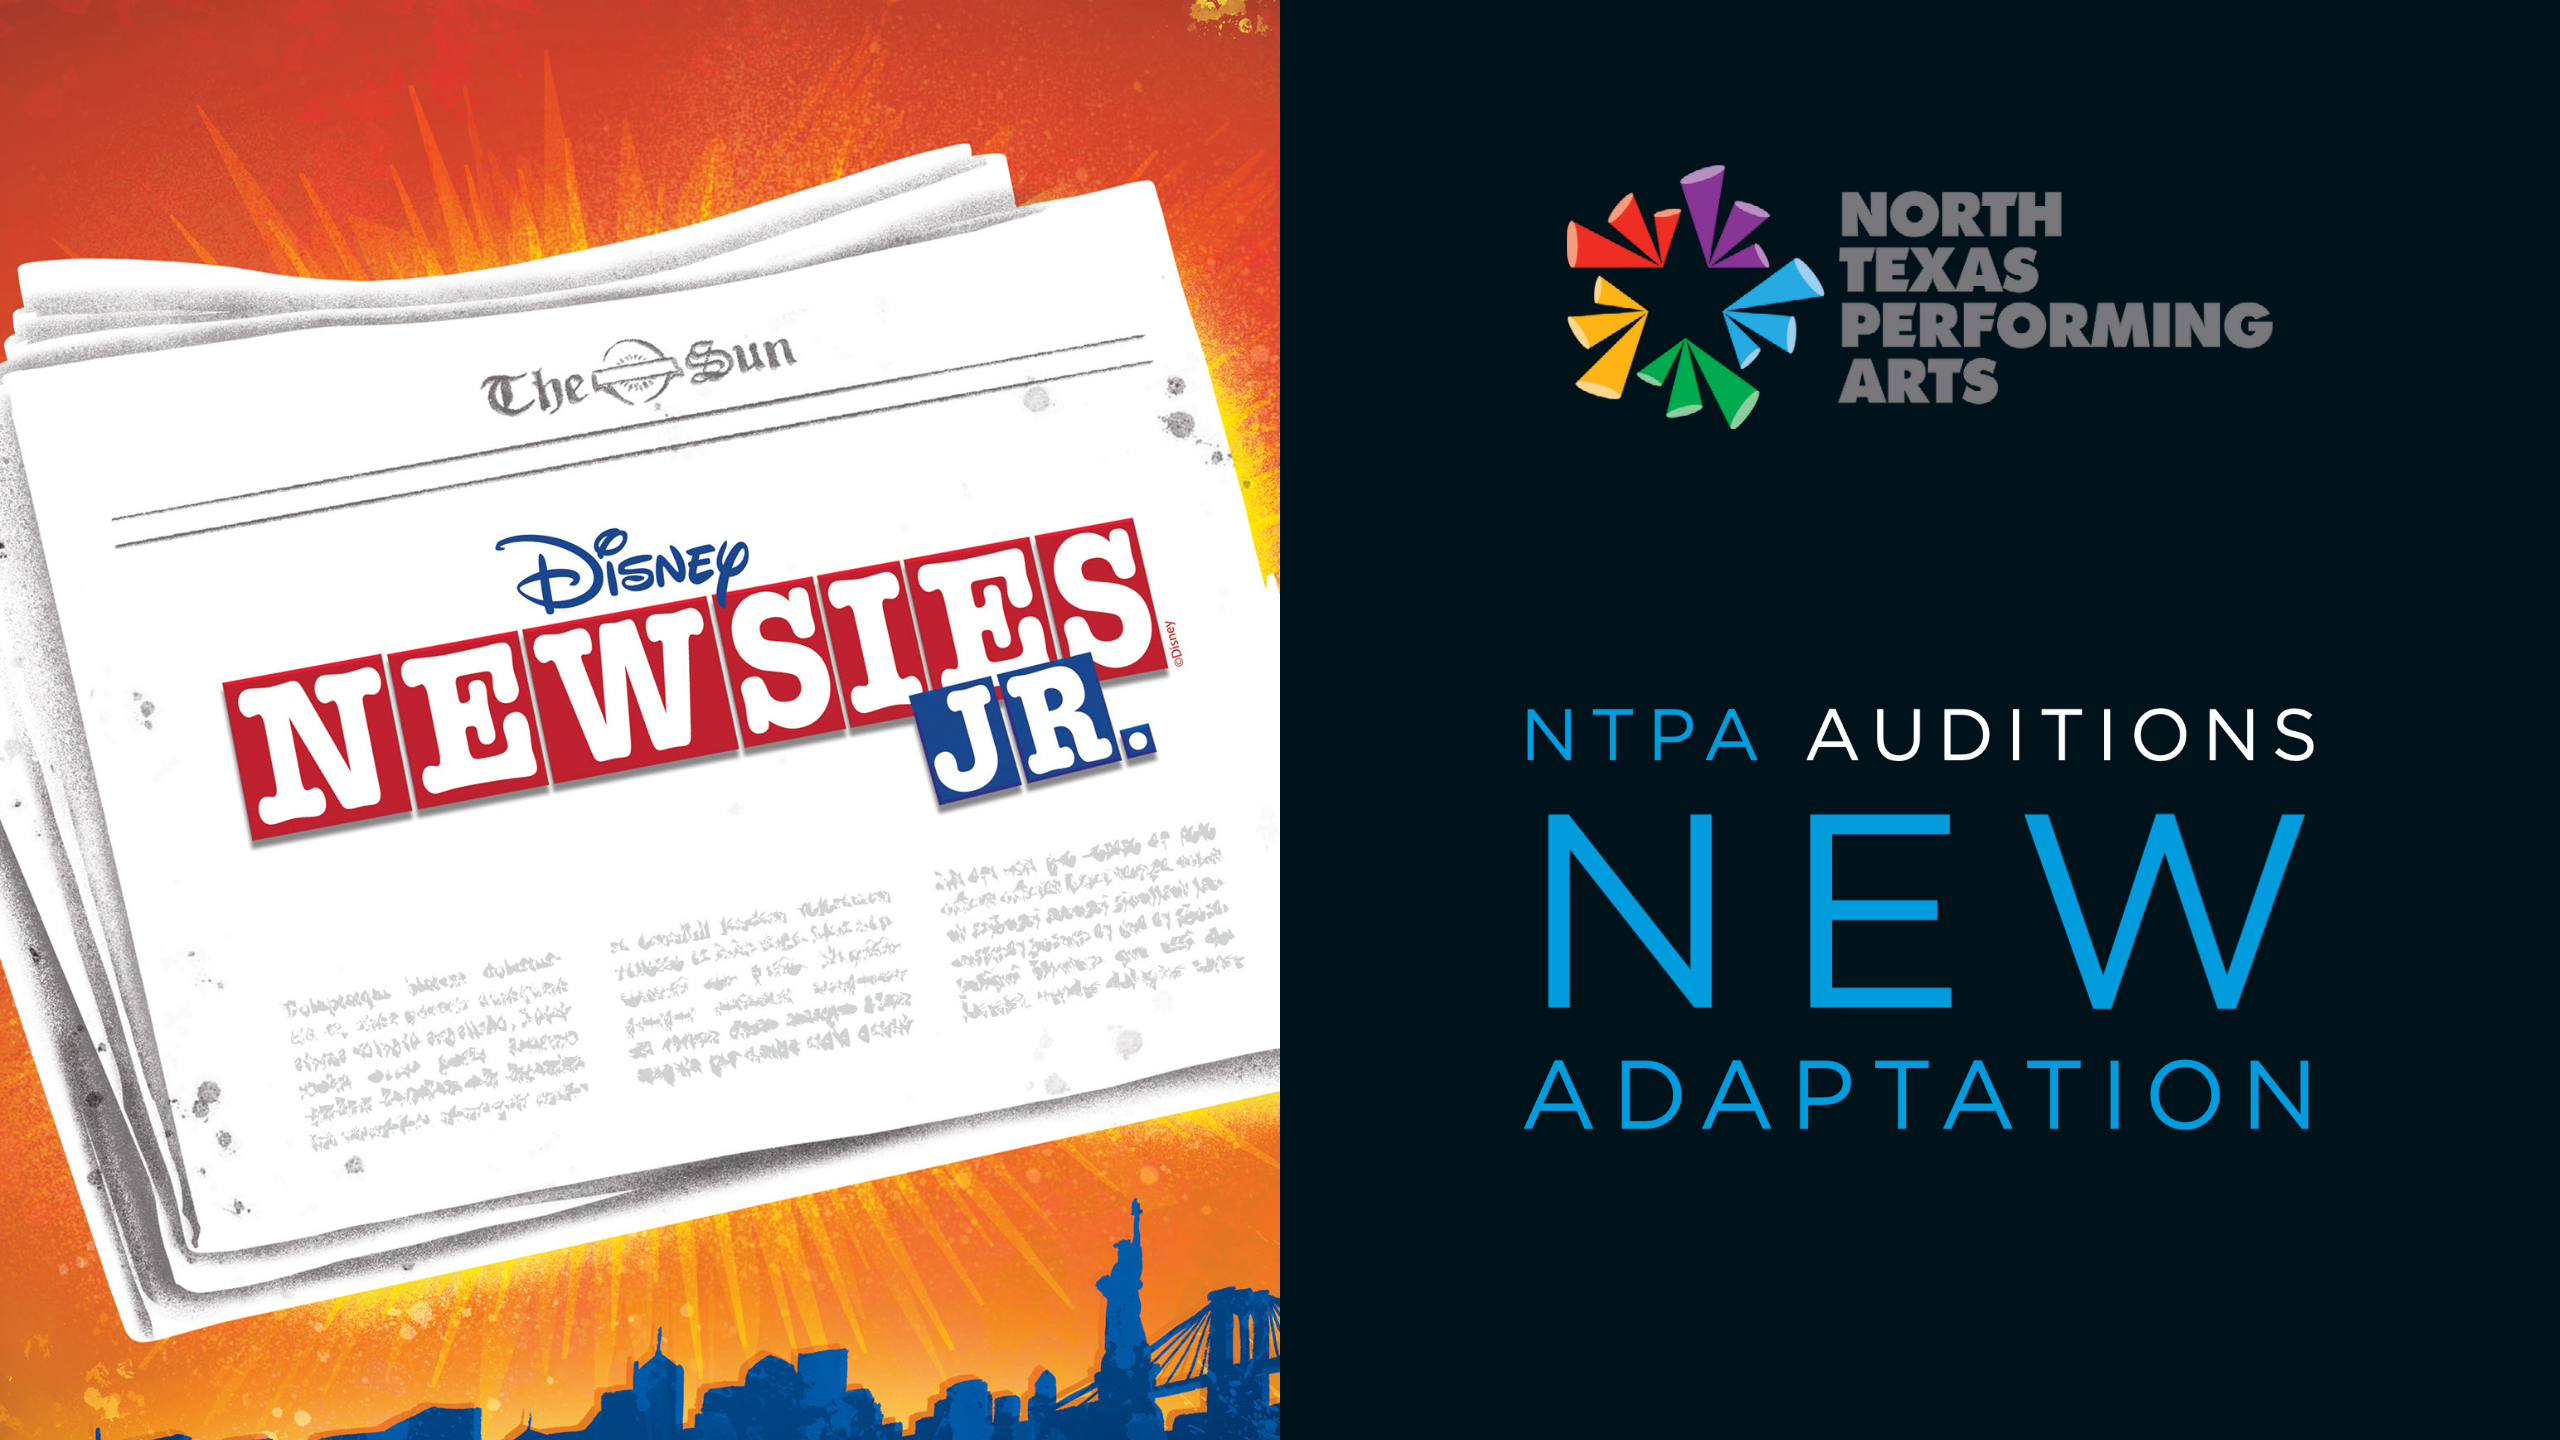 North Texas Performing Arts announces auditions for new adaptation of Newsies